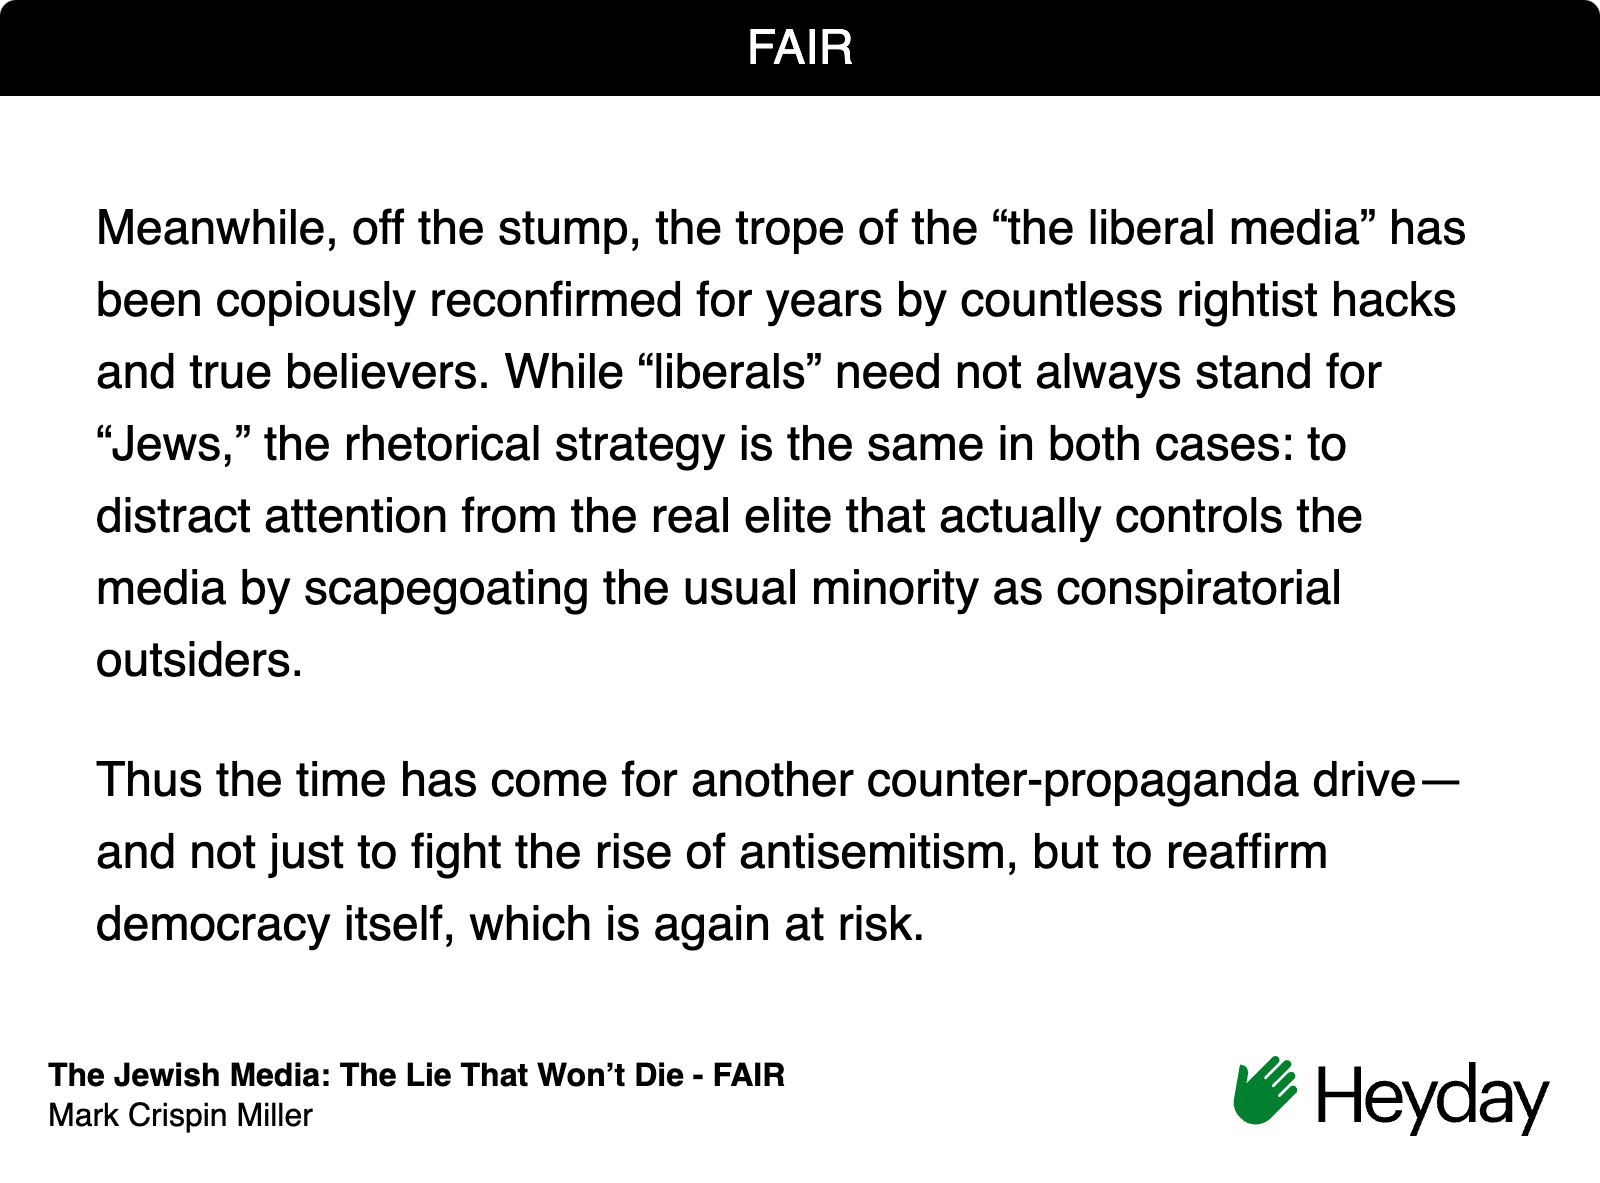 Quote from FAIR Magazine on the false trope about Jews running the media: "Meanwhile, off the stump, the trope of the “the liberal media” has been copiously reconfirmed for years by countless rightist hacks and true believers. While “liberals” need not always stand for “Jews,” the rhetorical strategy is the same in both cases: to distract attention from the real elite that actually controls the media by scapegoating the usual minority as conspiratorial outsiders.  Thus the time has come for another counter-propaganda drive—and not just to fight the rise of antisemitism, but to reaffirm democracy itself, which is again at risk."